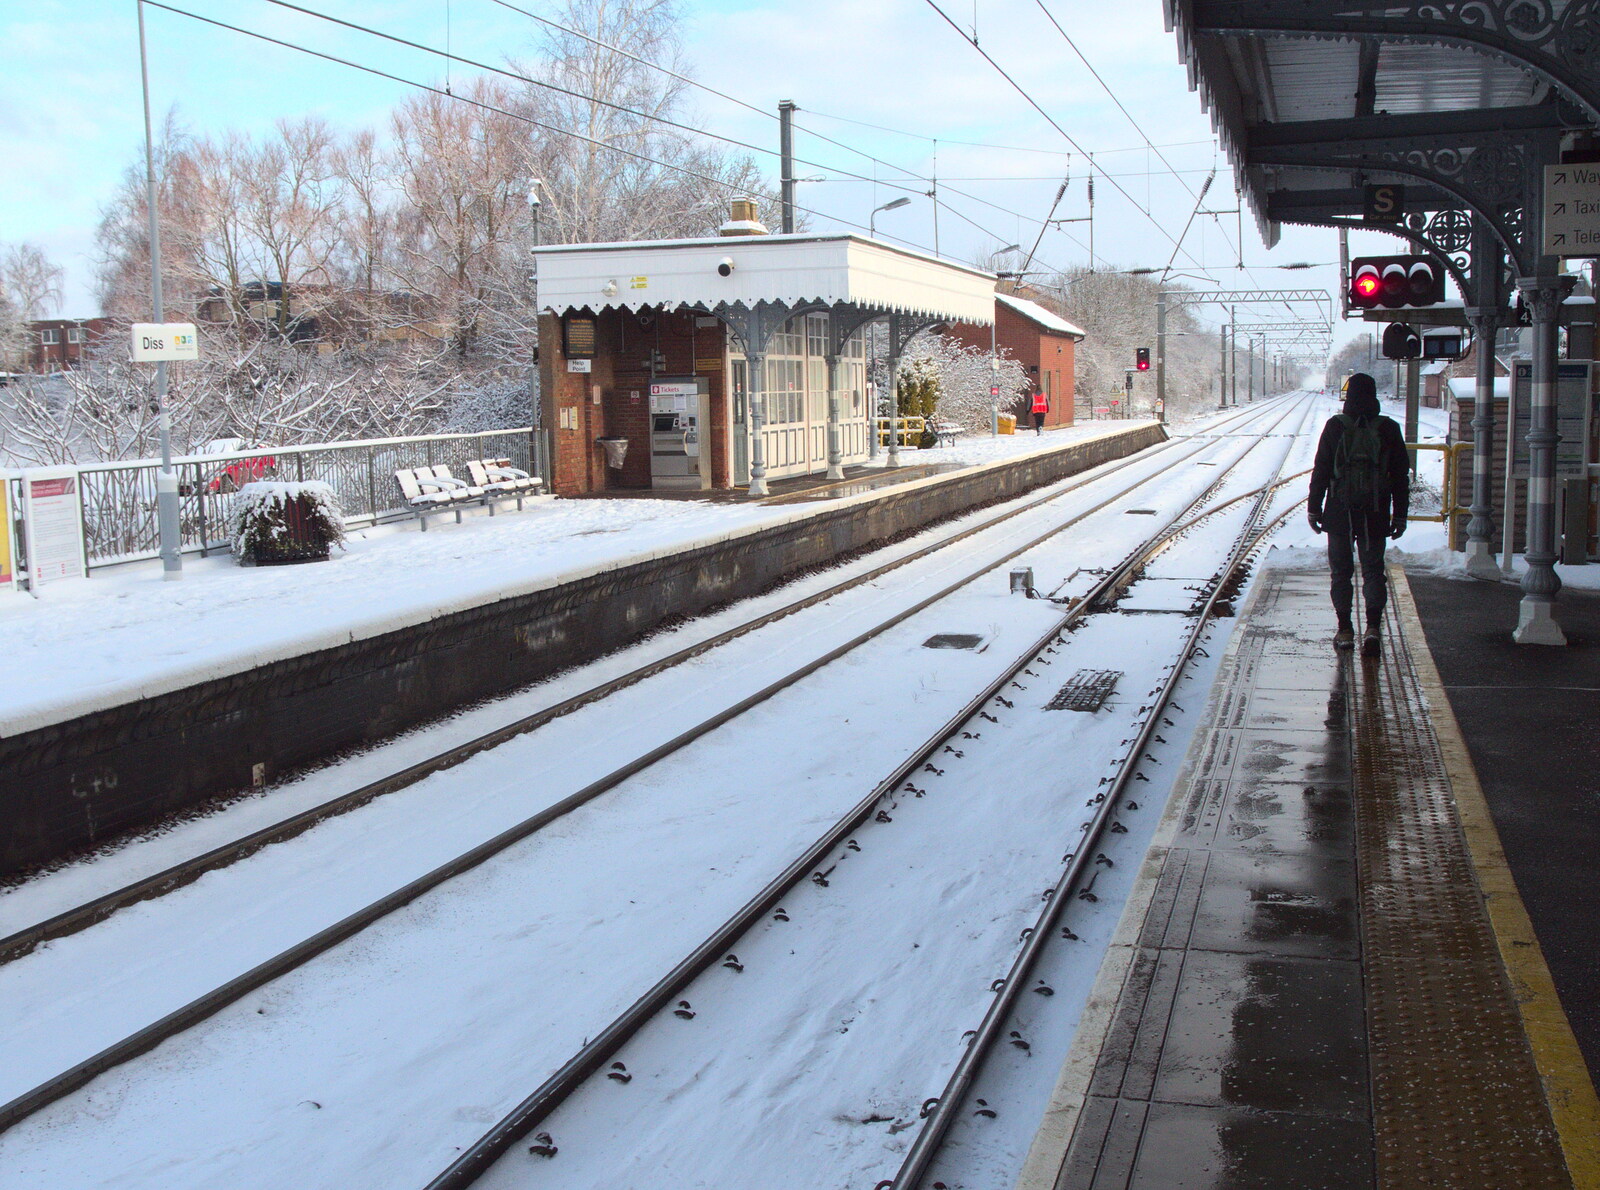 Snowmageddon: The Beast From the East, Suffolk and London - 27th February 2018: There's snow on the tracks at Diss Station